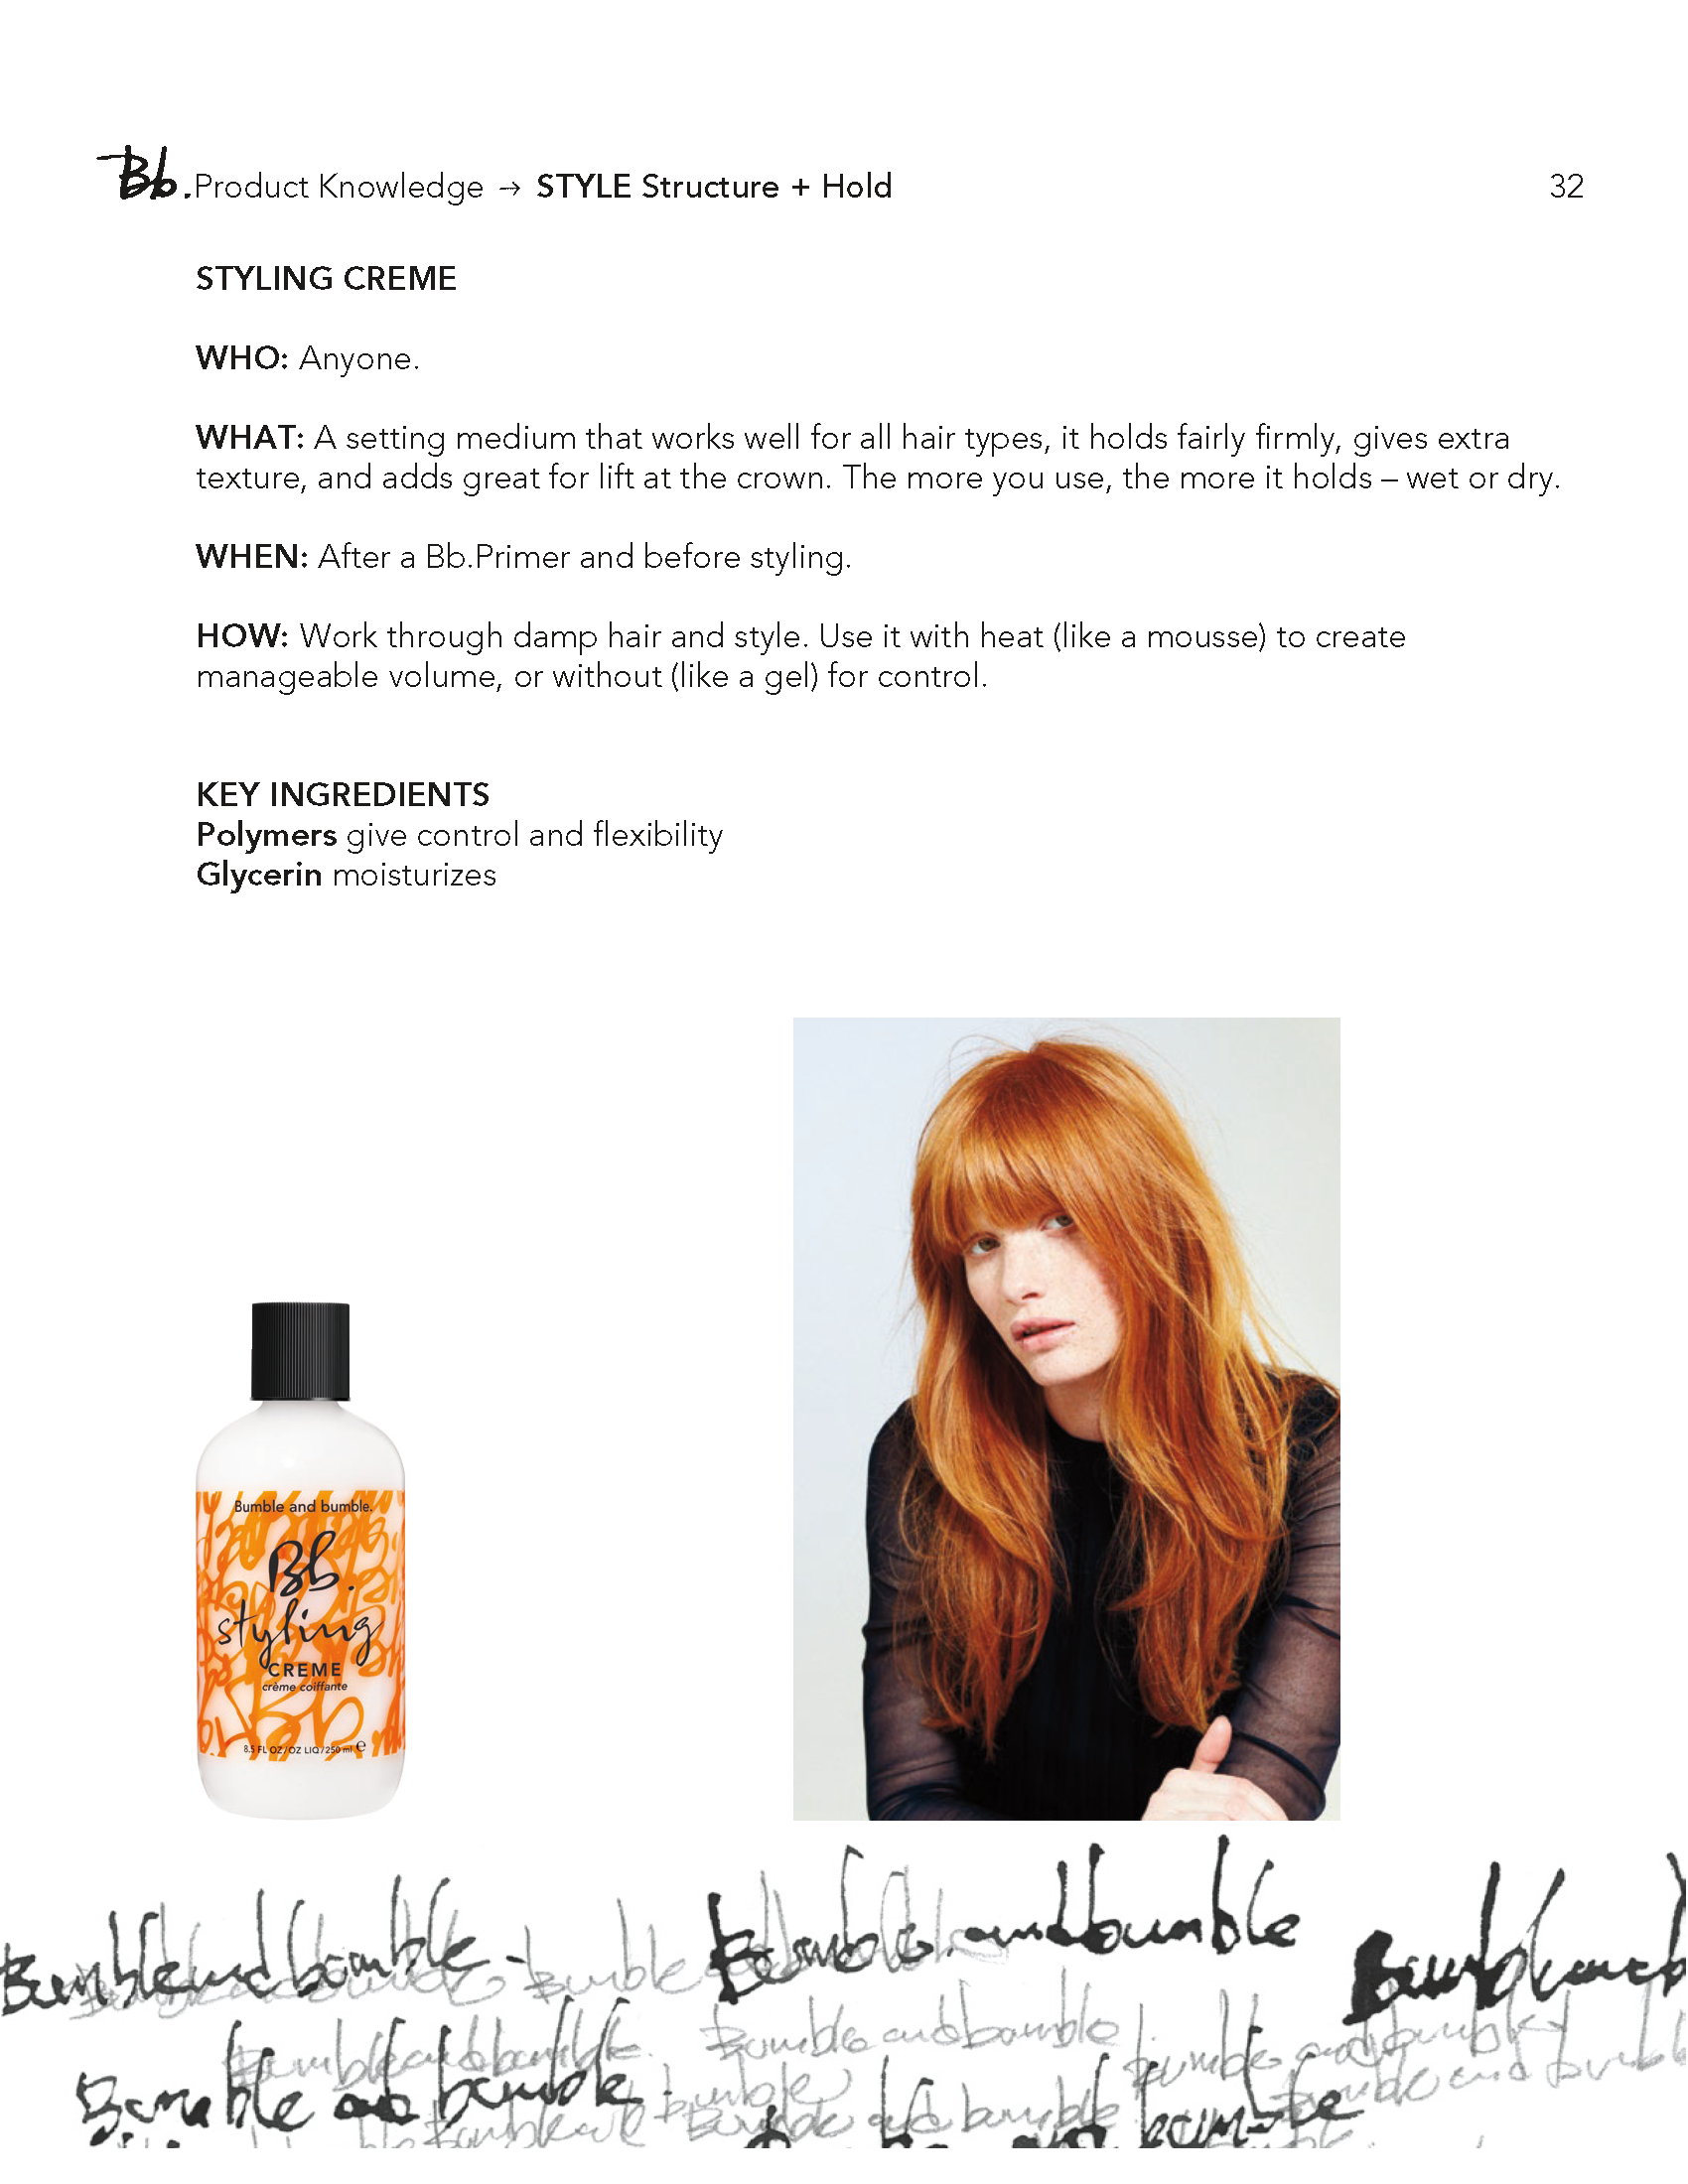 2021 Bumble Collections PK Notes for Salons - FULL LINE - Blonde + Ultra + Curl (1)_Page_74.png